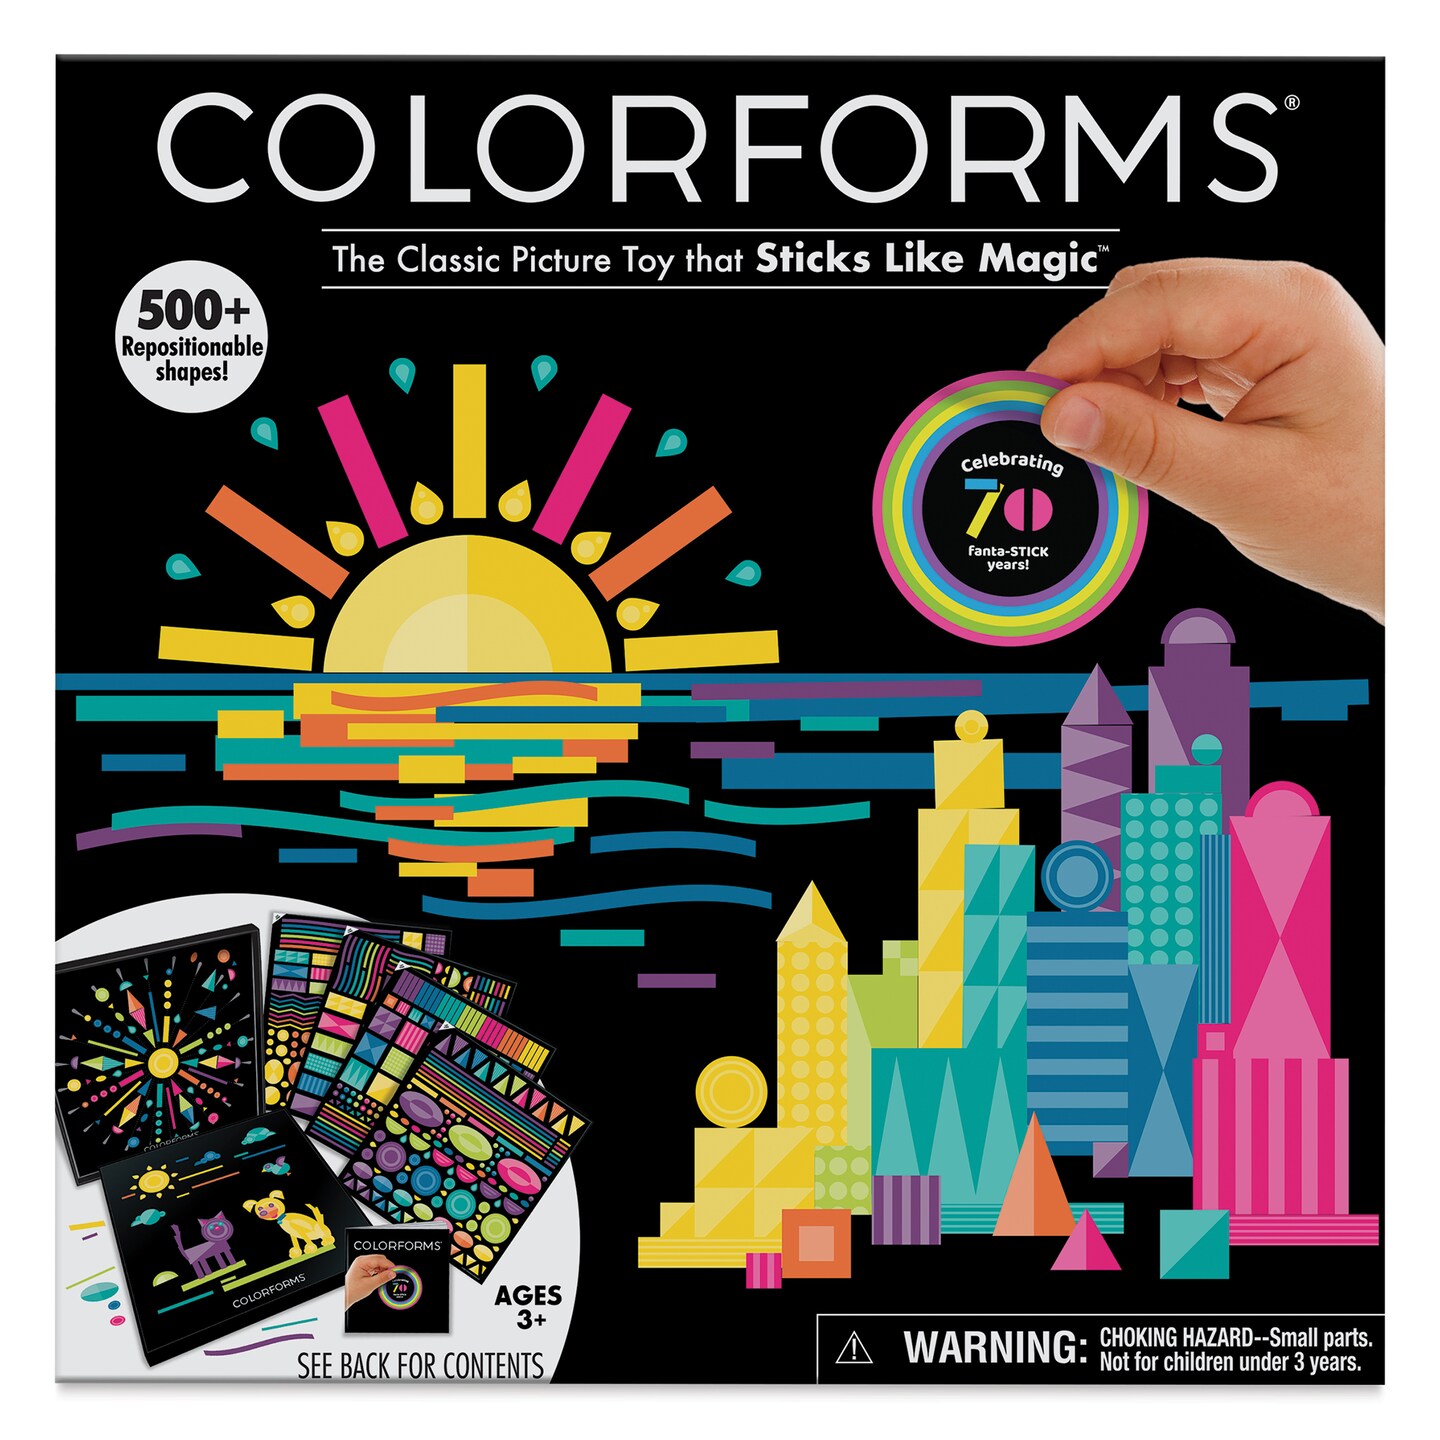 Colorforms Cling Vinyl Play Set - 70th Anniversary